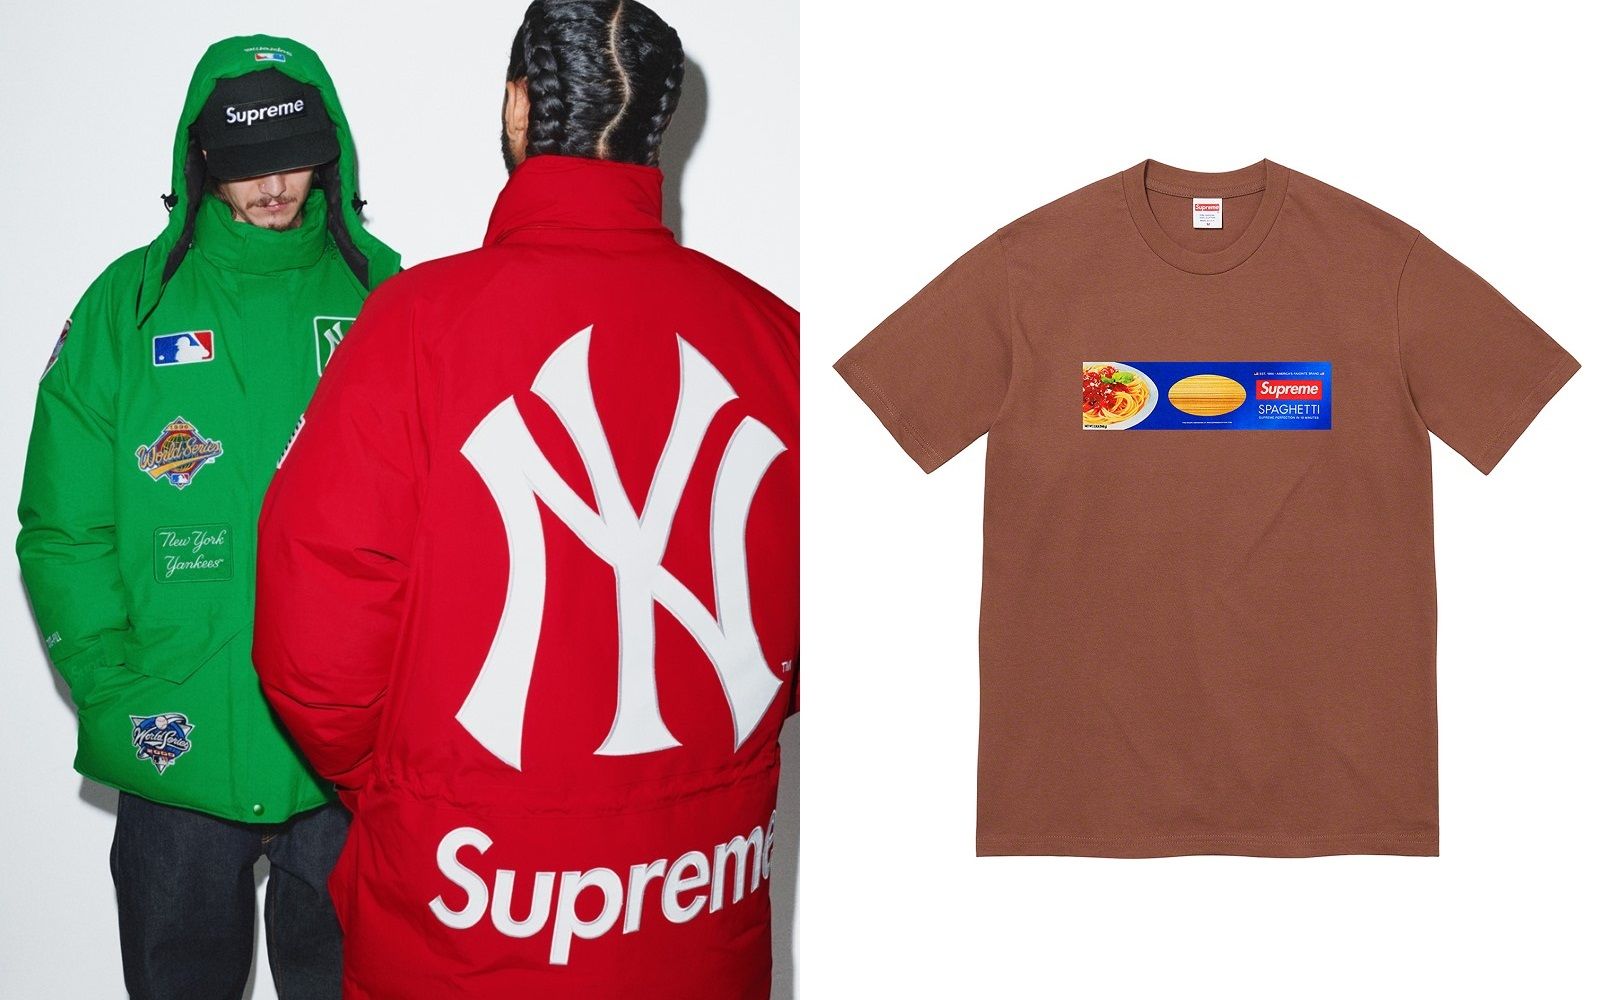 Supreme, 'Shrek' (red) (2021), Available for Sale